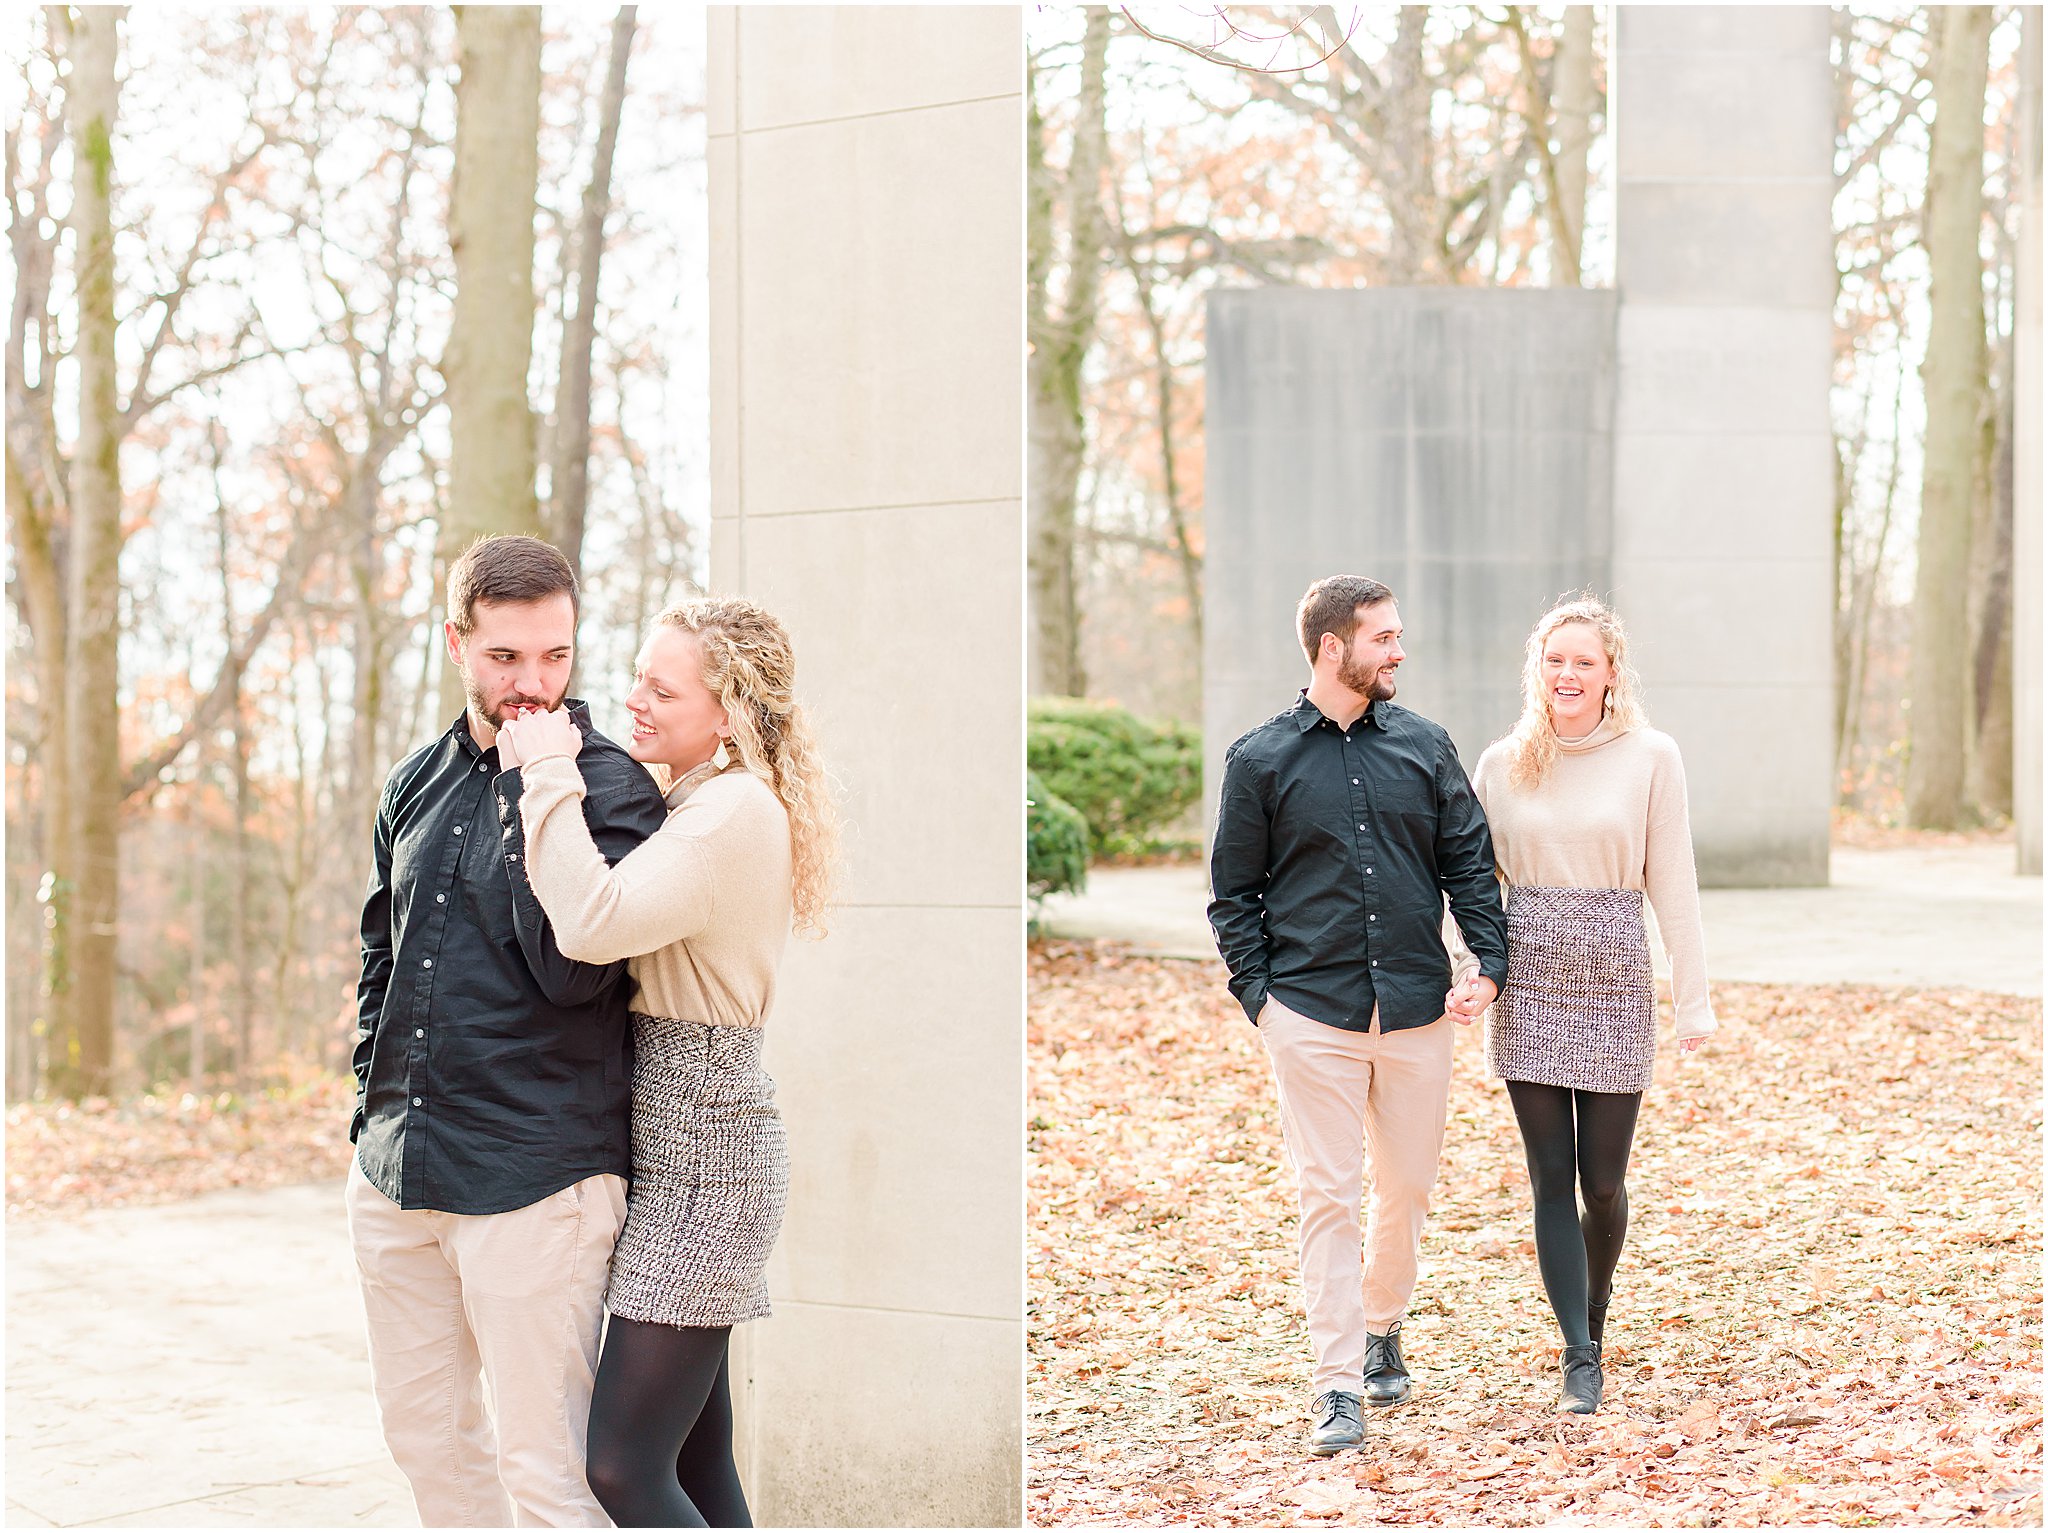 Guy kissing girl's hand during Holcomb Gardens engagement session